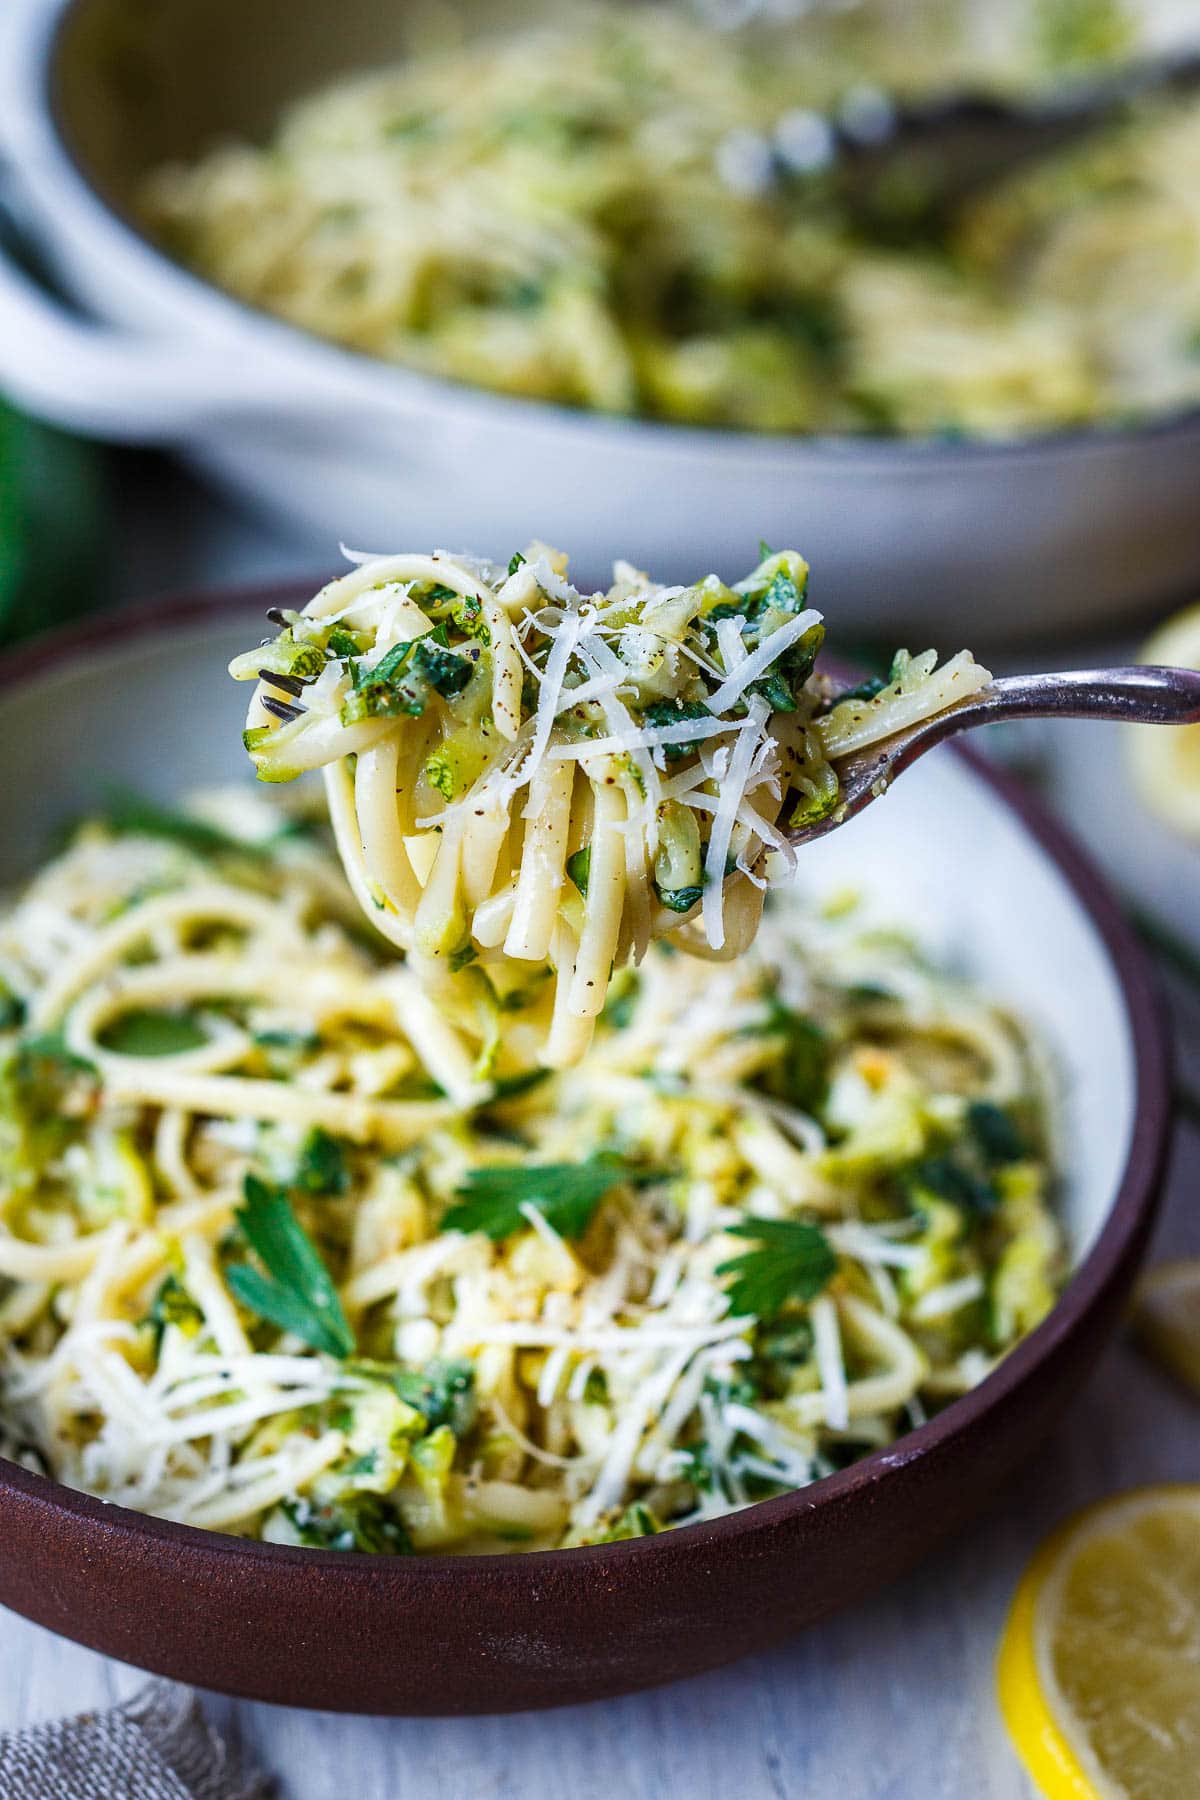 Here's a quick and simple recipe for creamy Zucchini Pasta. Grated zucchini melts into a flavorful succulent sauce, perfect for cradling linguini or your favorite pasta! Enhanced with lemon, black pepper and garlic you'll have this on the table in 30 minutes!  Vegan and gluten-free adaptable.